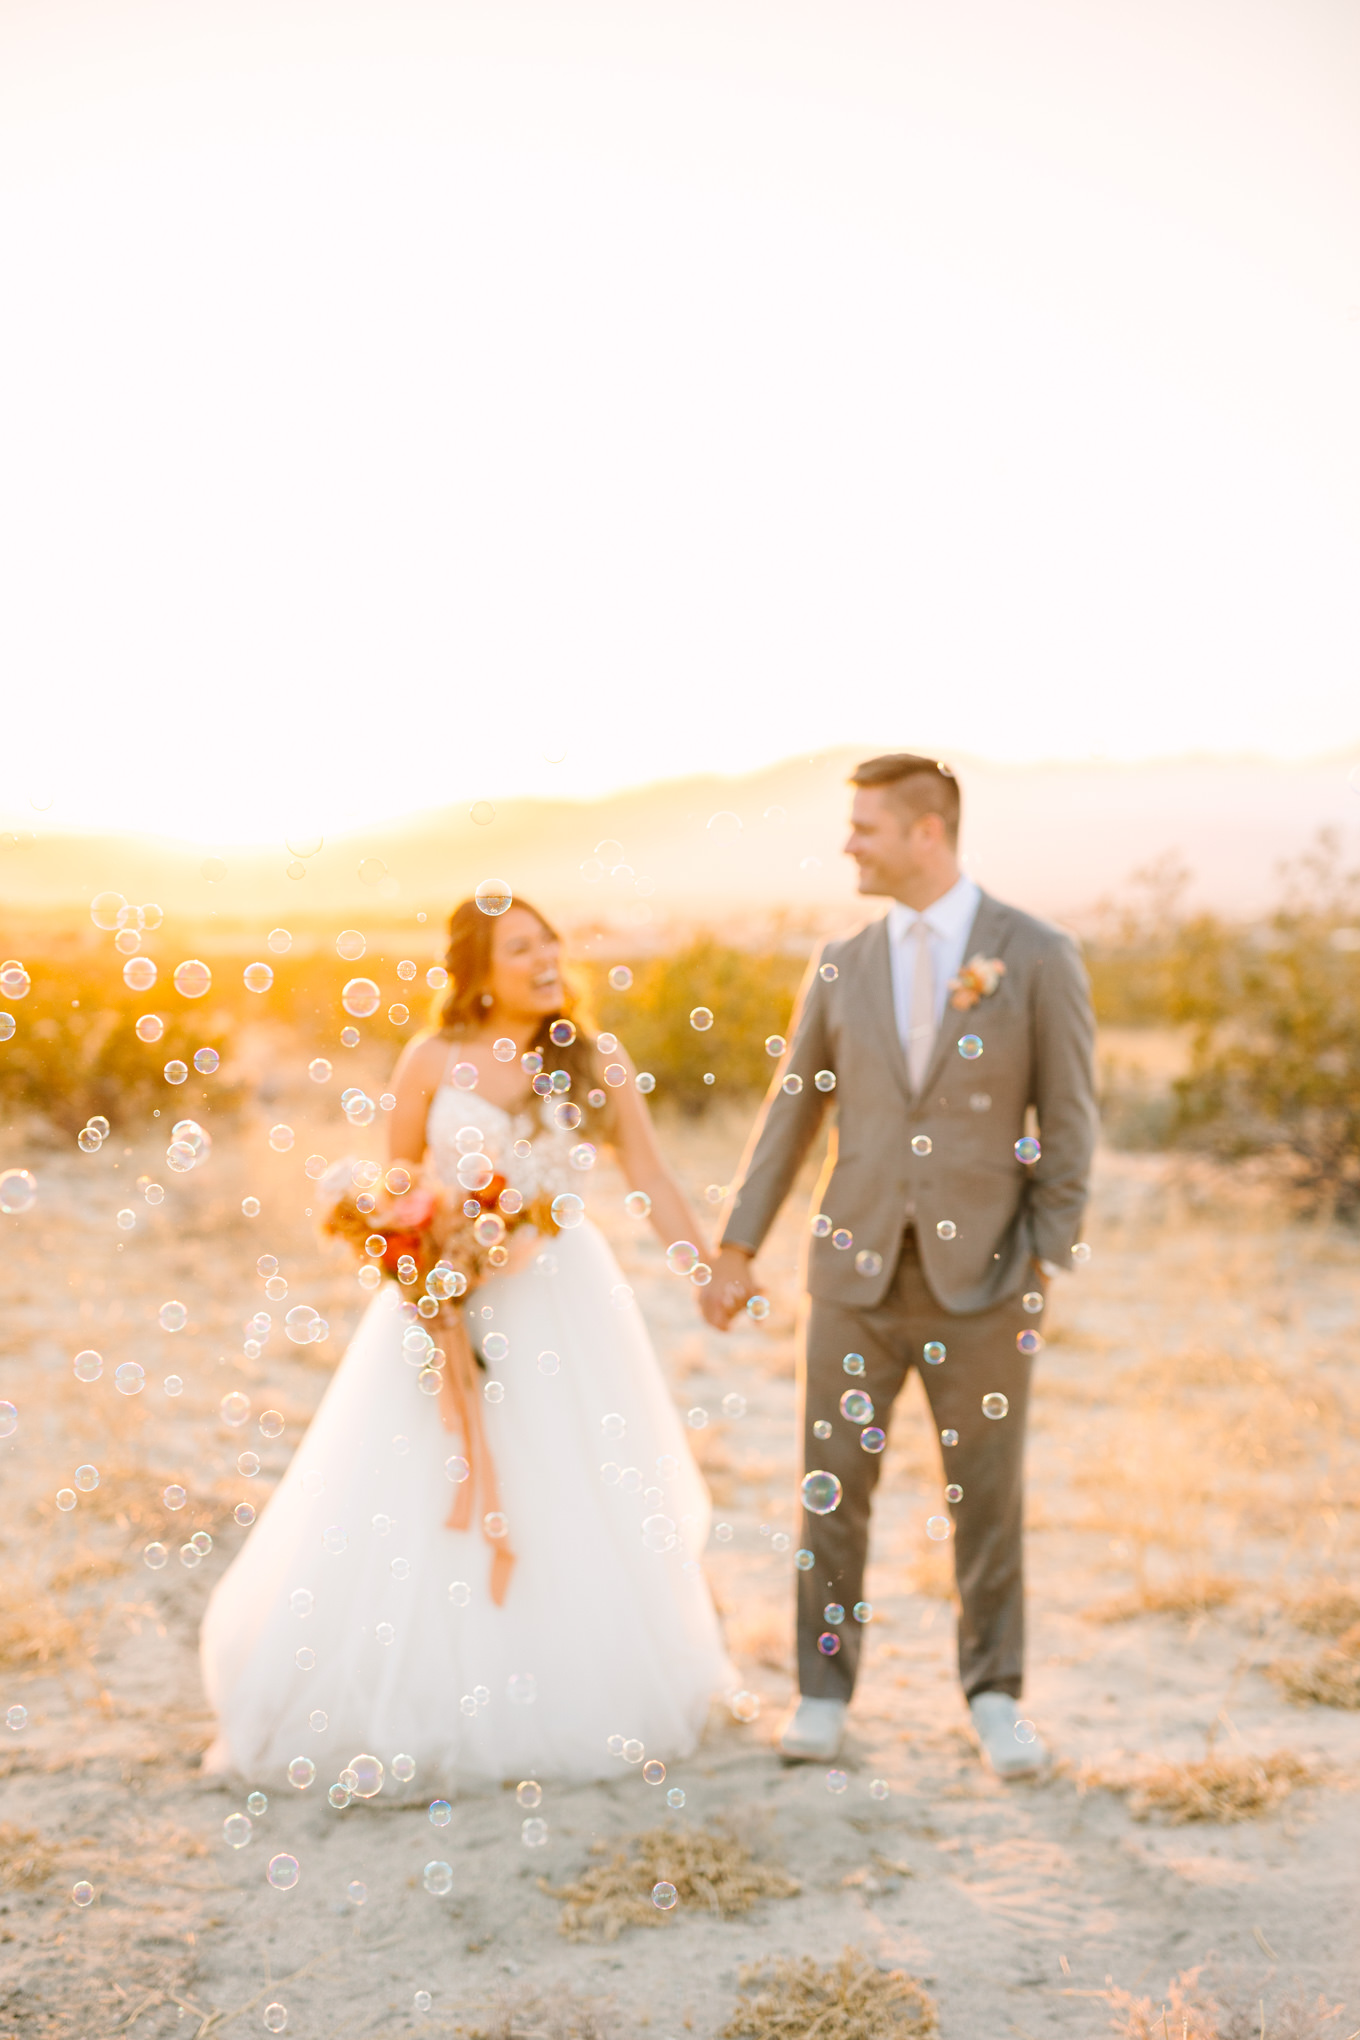 Bride and groom surrounded by bubbles at sunset | Pink and orange Lautner Compound wedding | Colorful Palm Springs wedding photography | #palmspringsphotographer #palmspringswedding #lautnercompound #southerncaliforniawedding  Source: Mary Costa Photography | Los Angeles